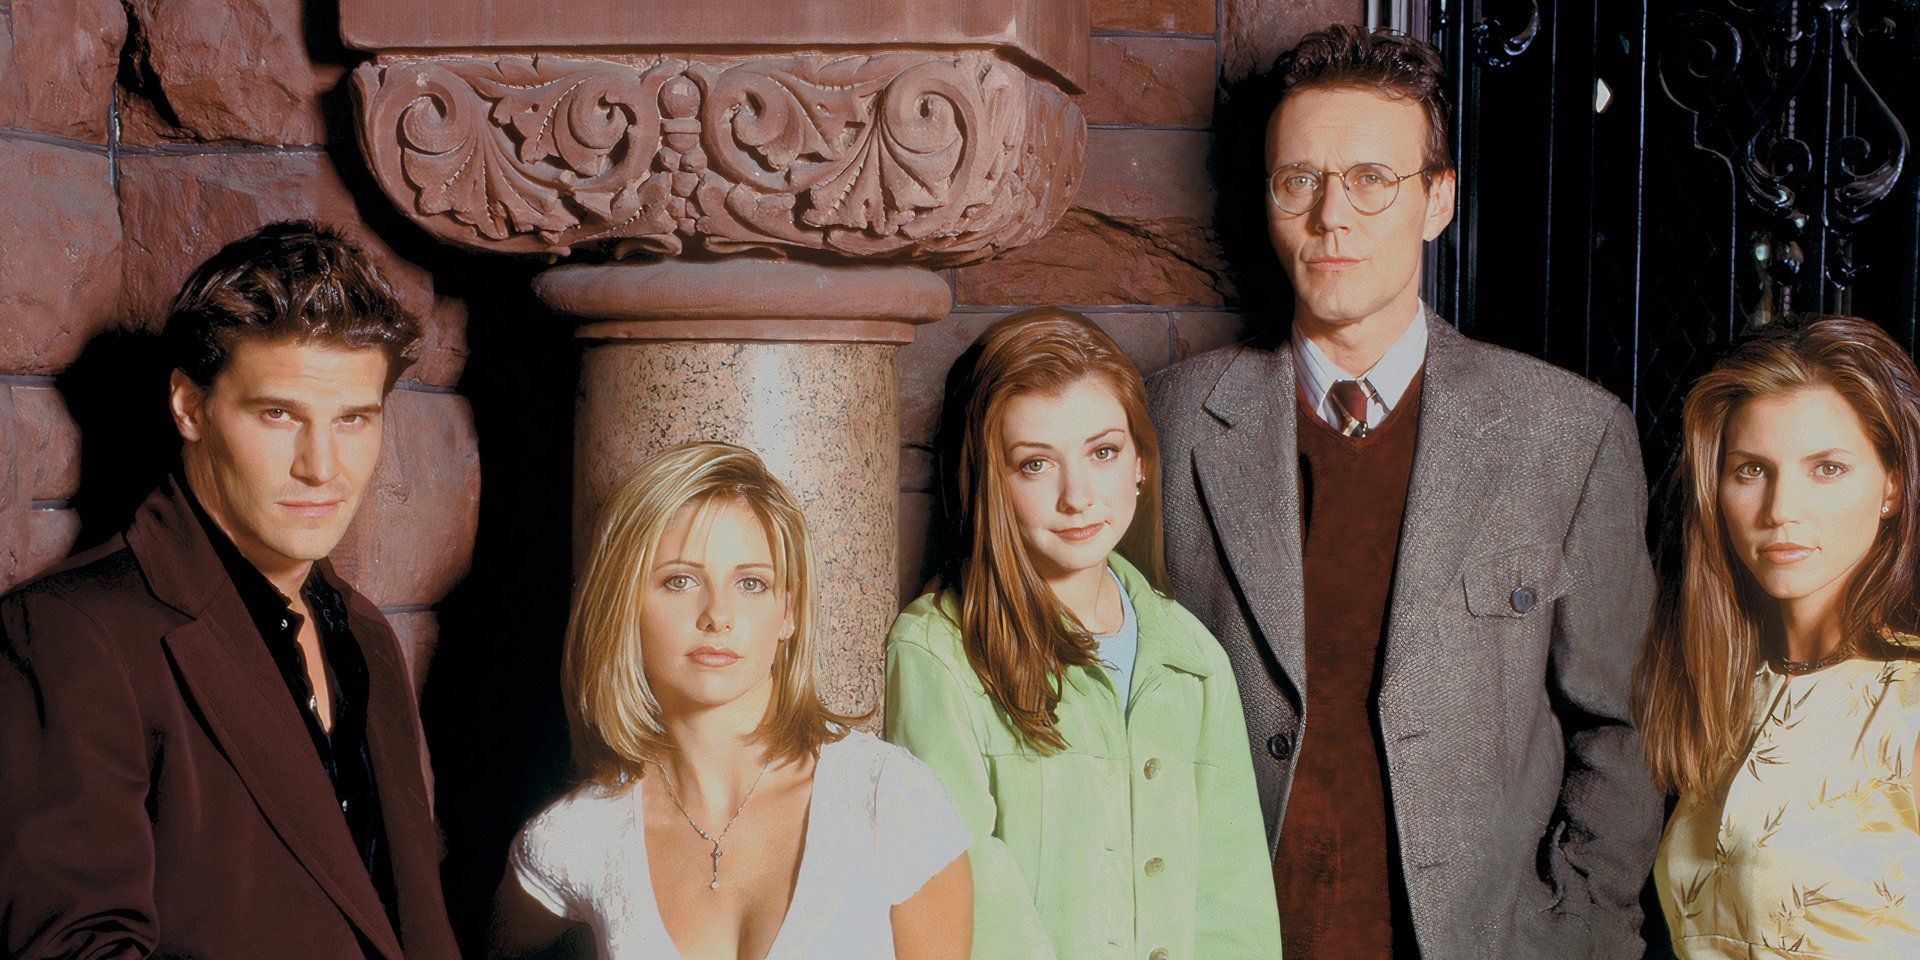 The cast of Buffy season 2 in a group photo